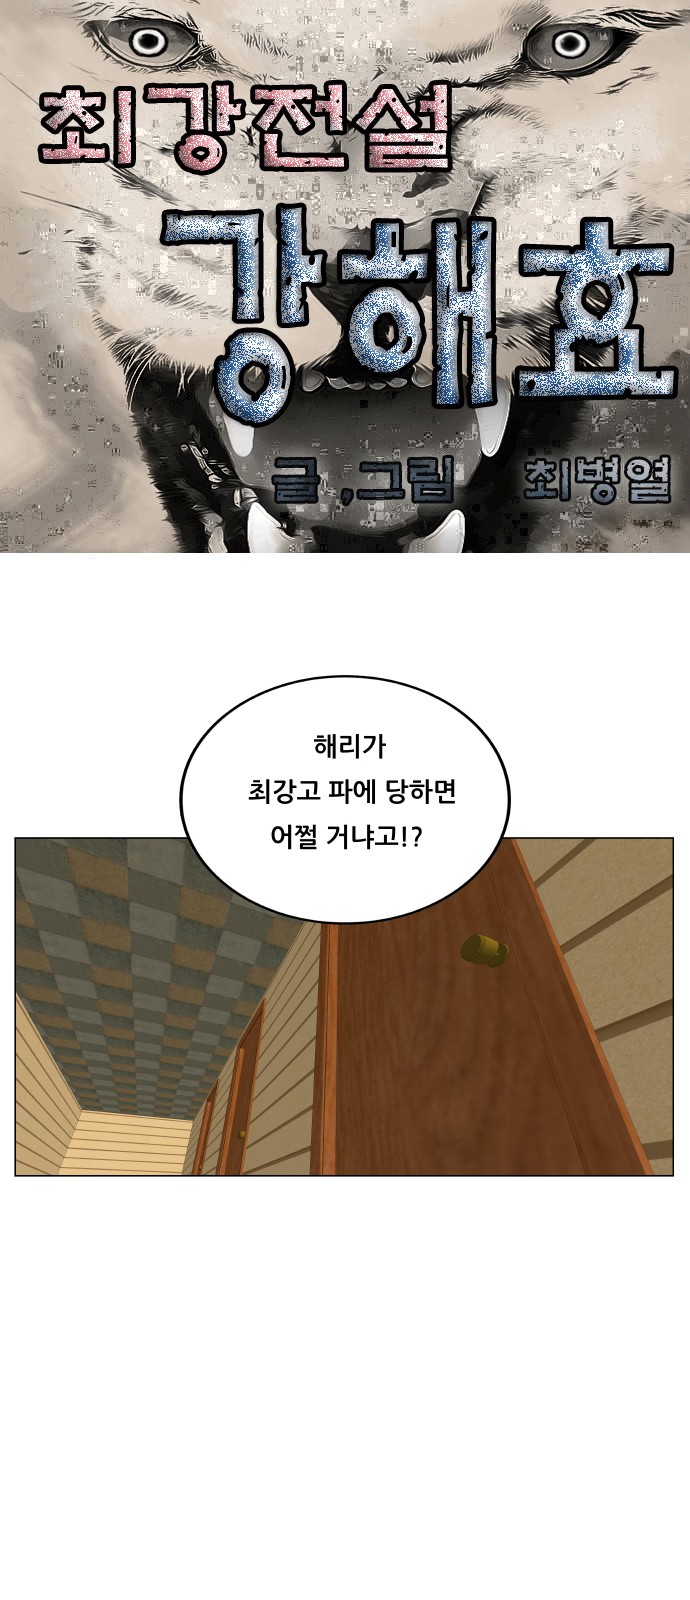 Ultimate Legend - Kang Hae Hyo - Chapter 328 - Page 1